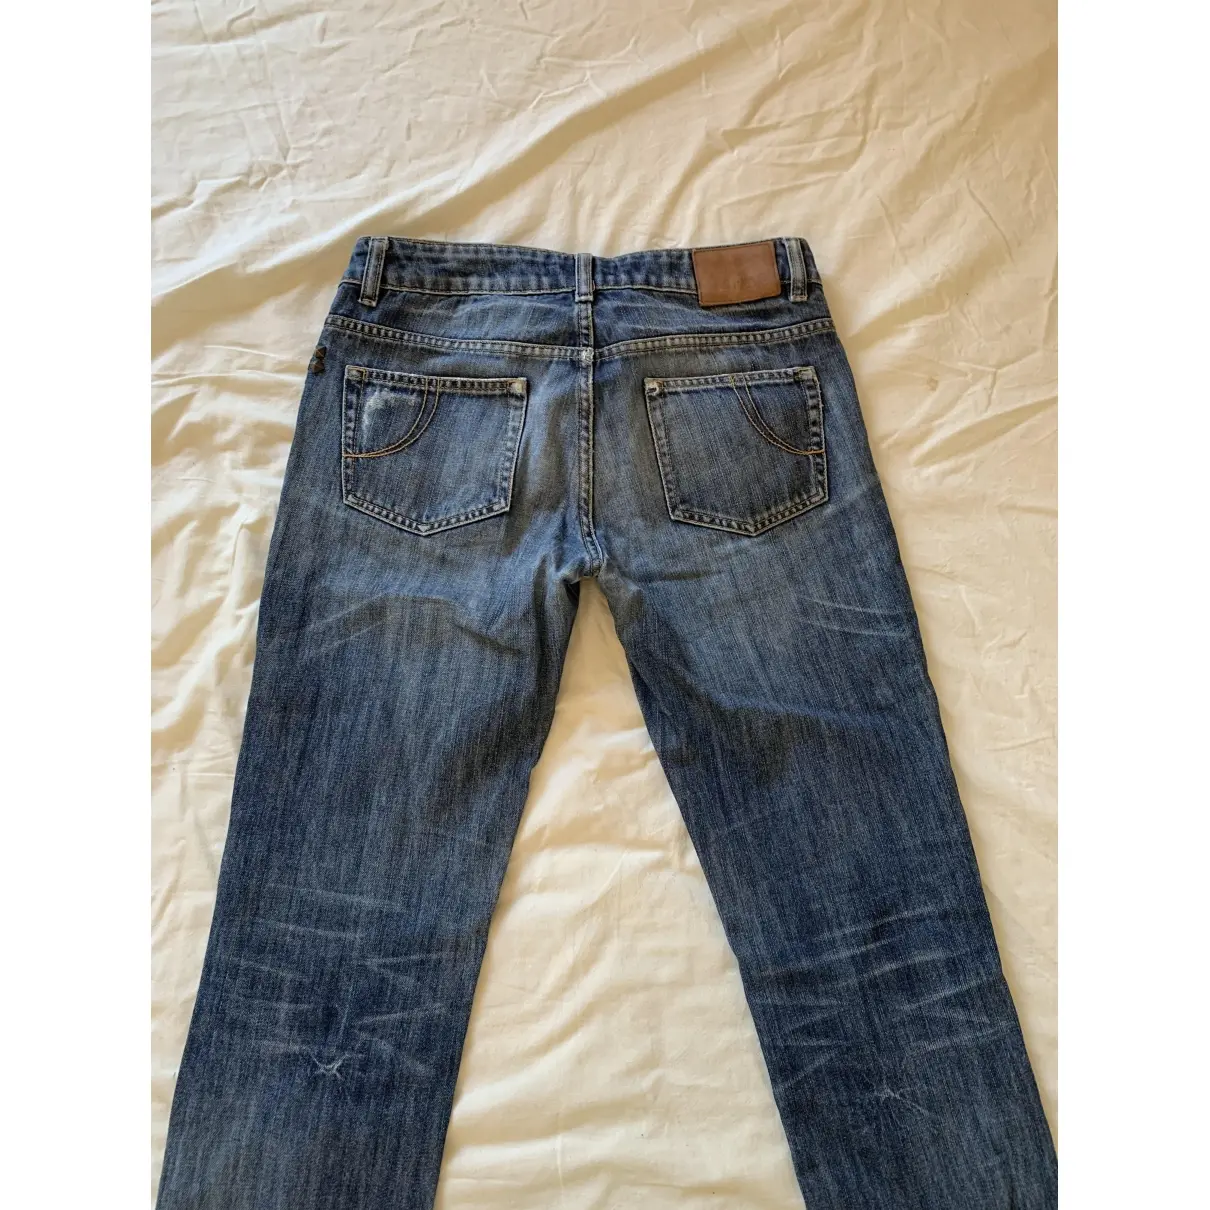 Maje Straight jeans for sale